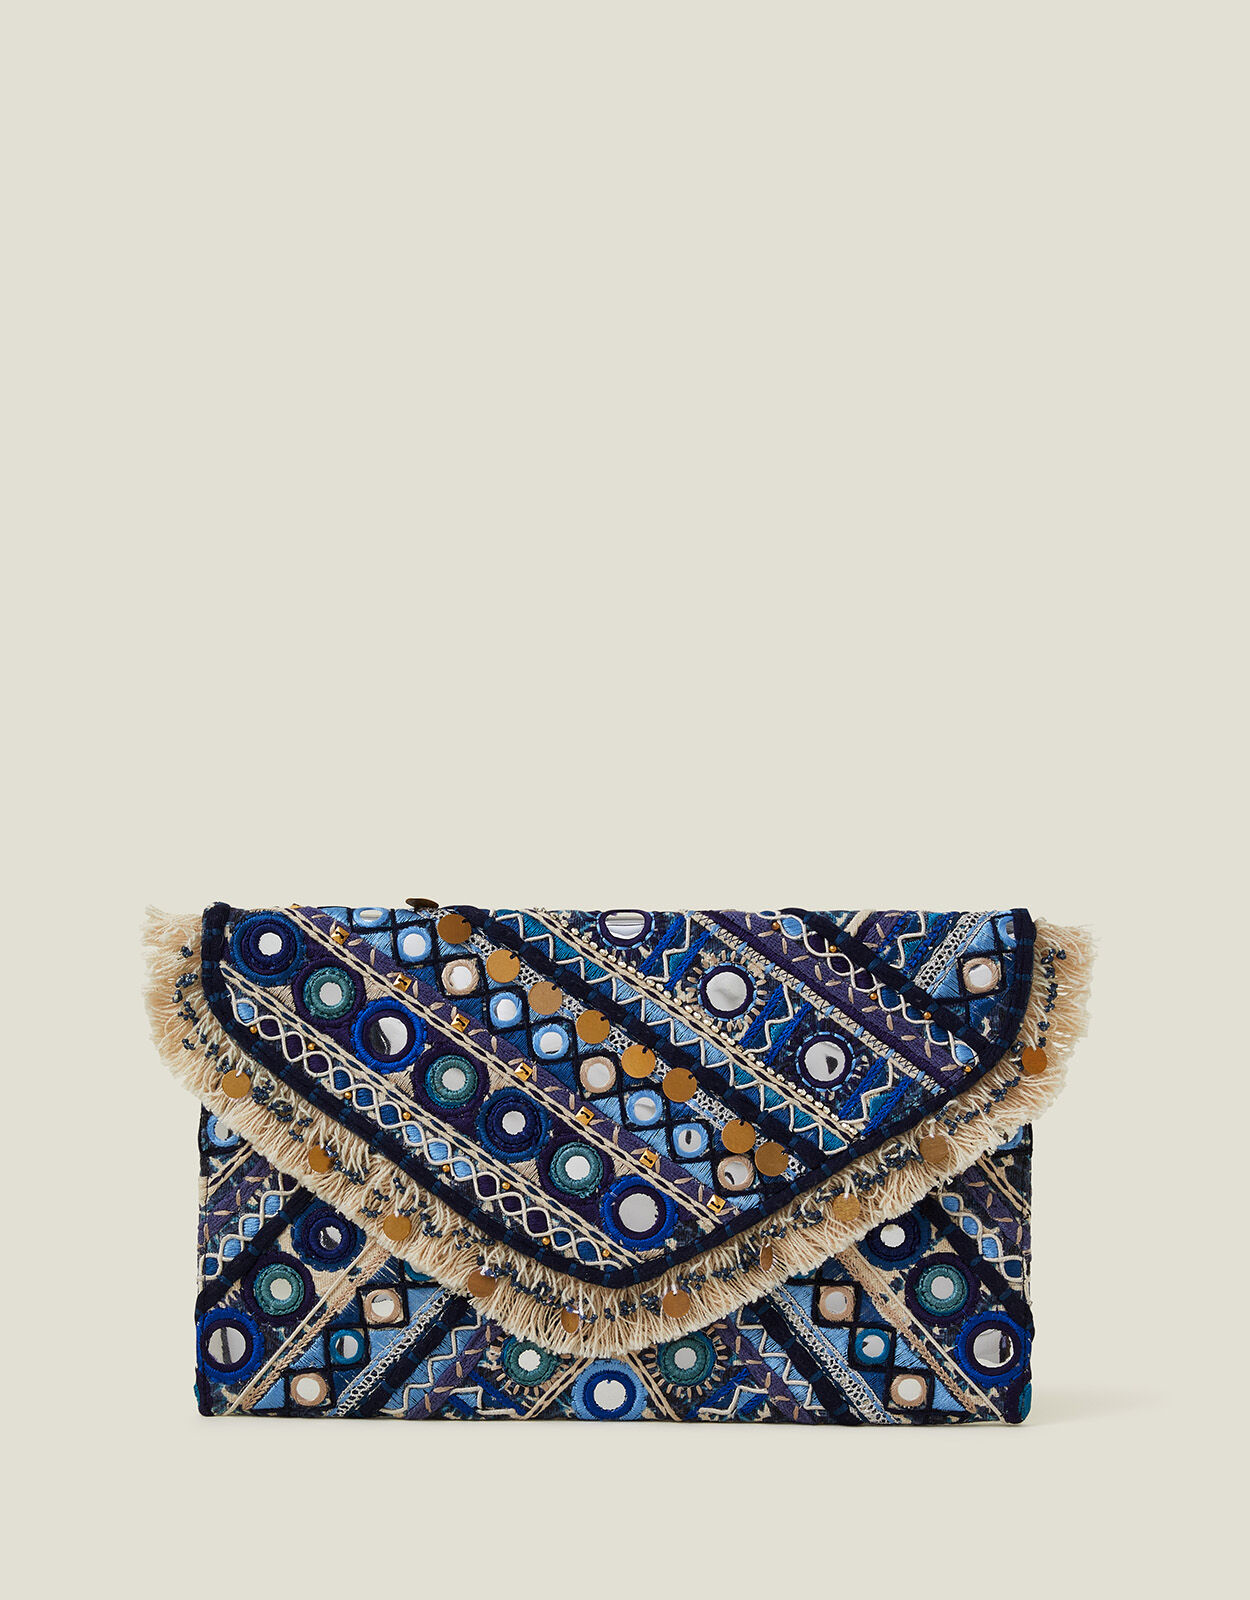 Clutch Bags | Gold, Silver & Sparkly Clutch Bags | Accessorize UK